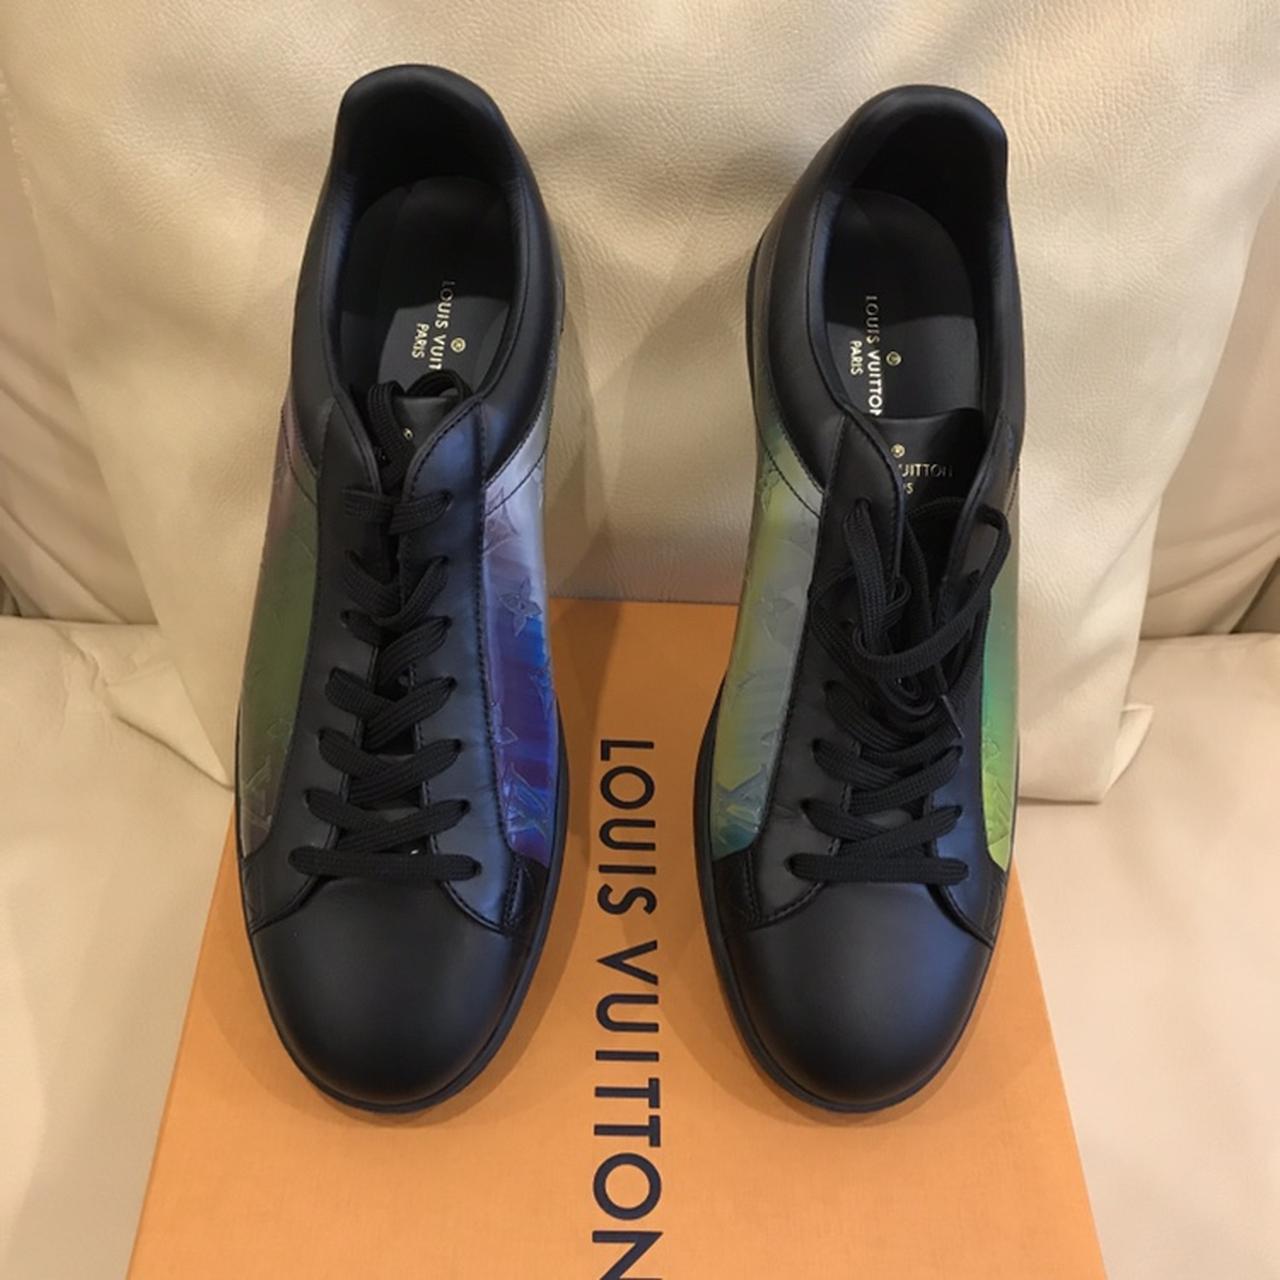 Louis Vuitton Casual Luxembourg Prism Rainbow Low Sneaker Sz 10 BRAND NEW